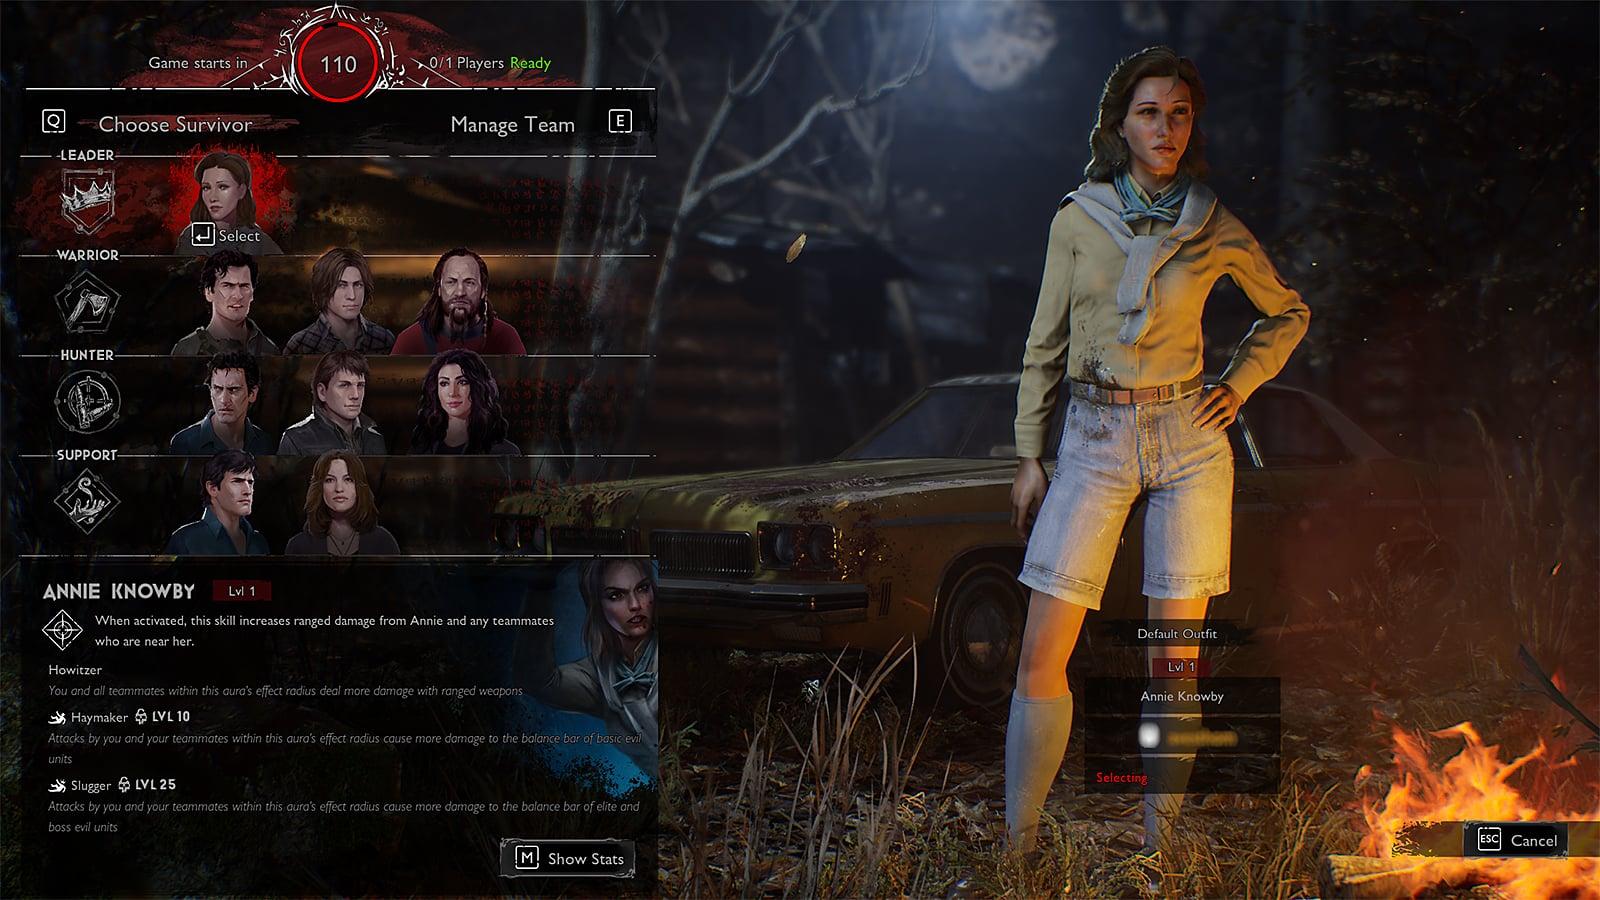 Annie Knowby in Evil Dead The Game, one of the Leader classes